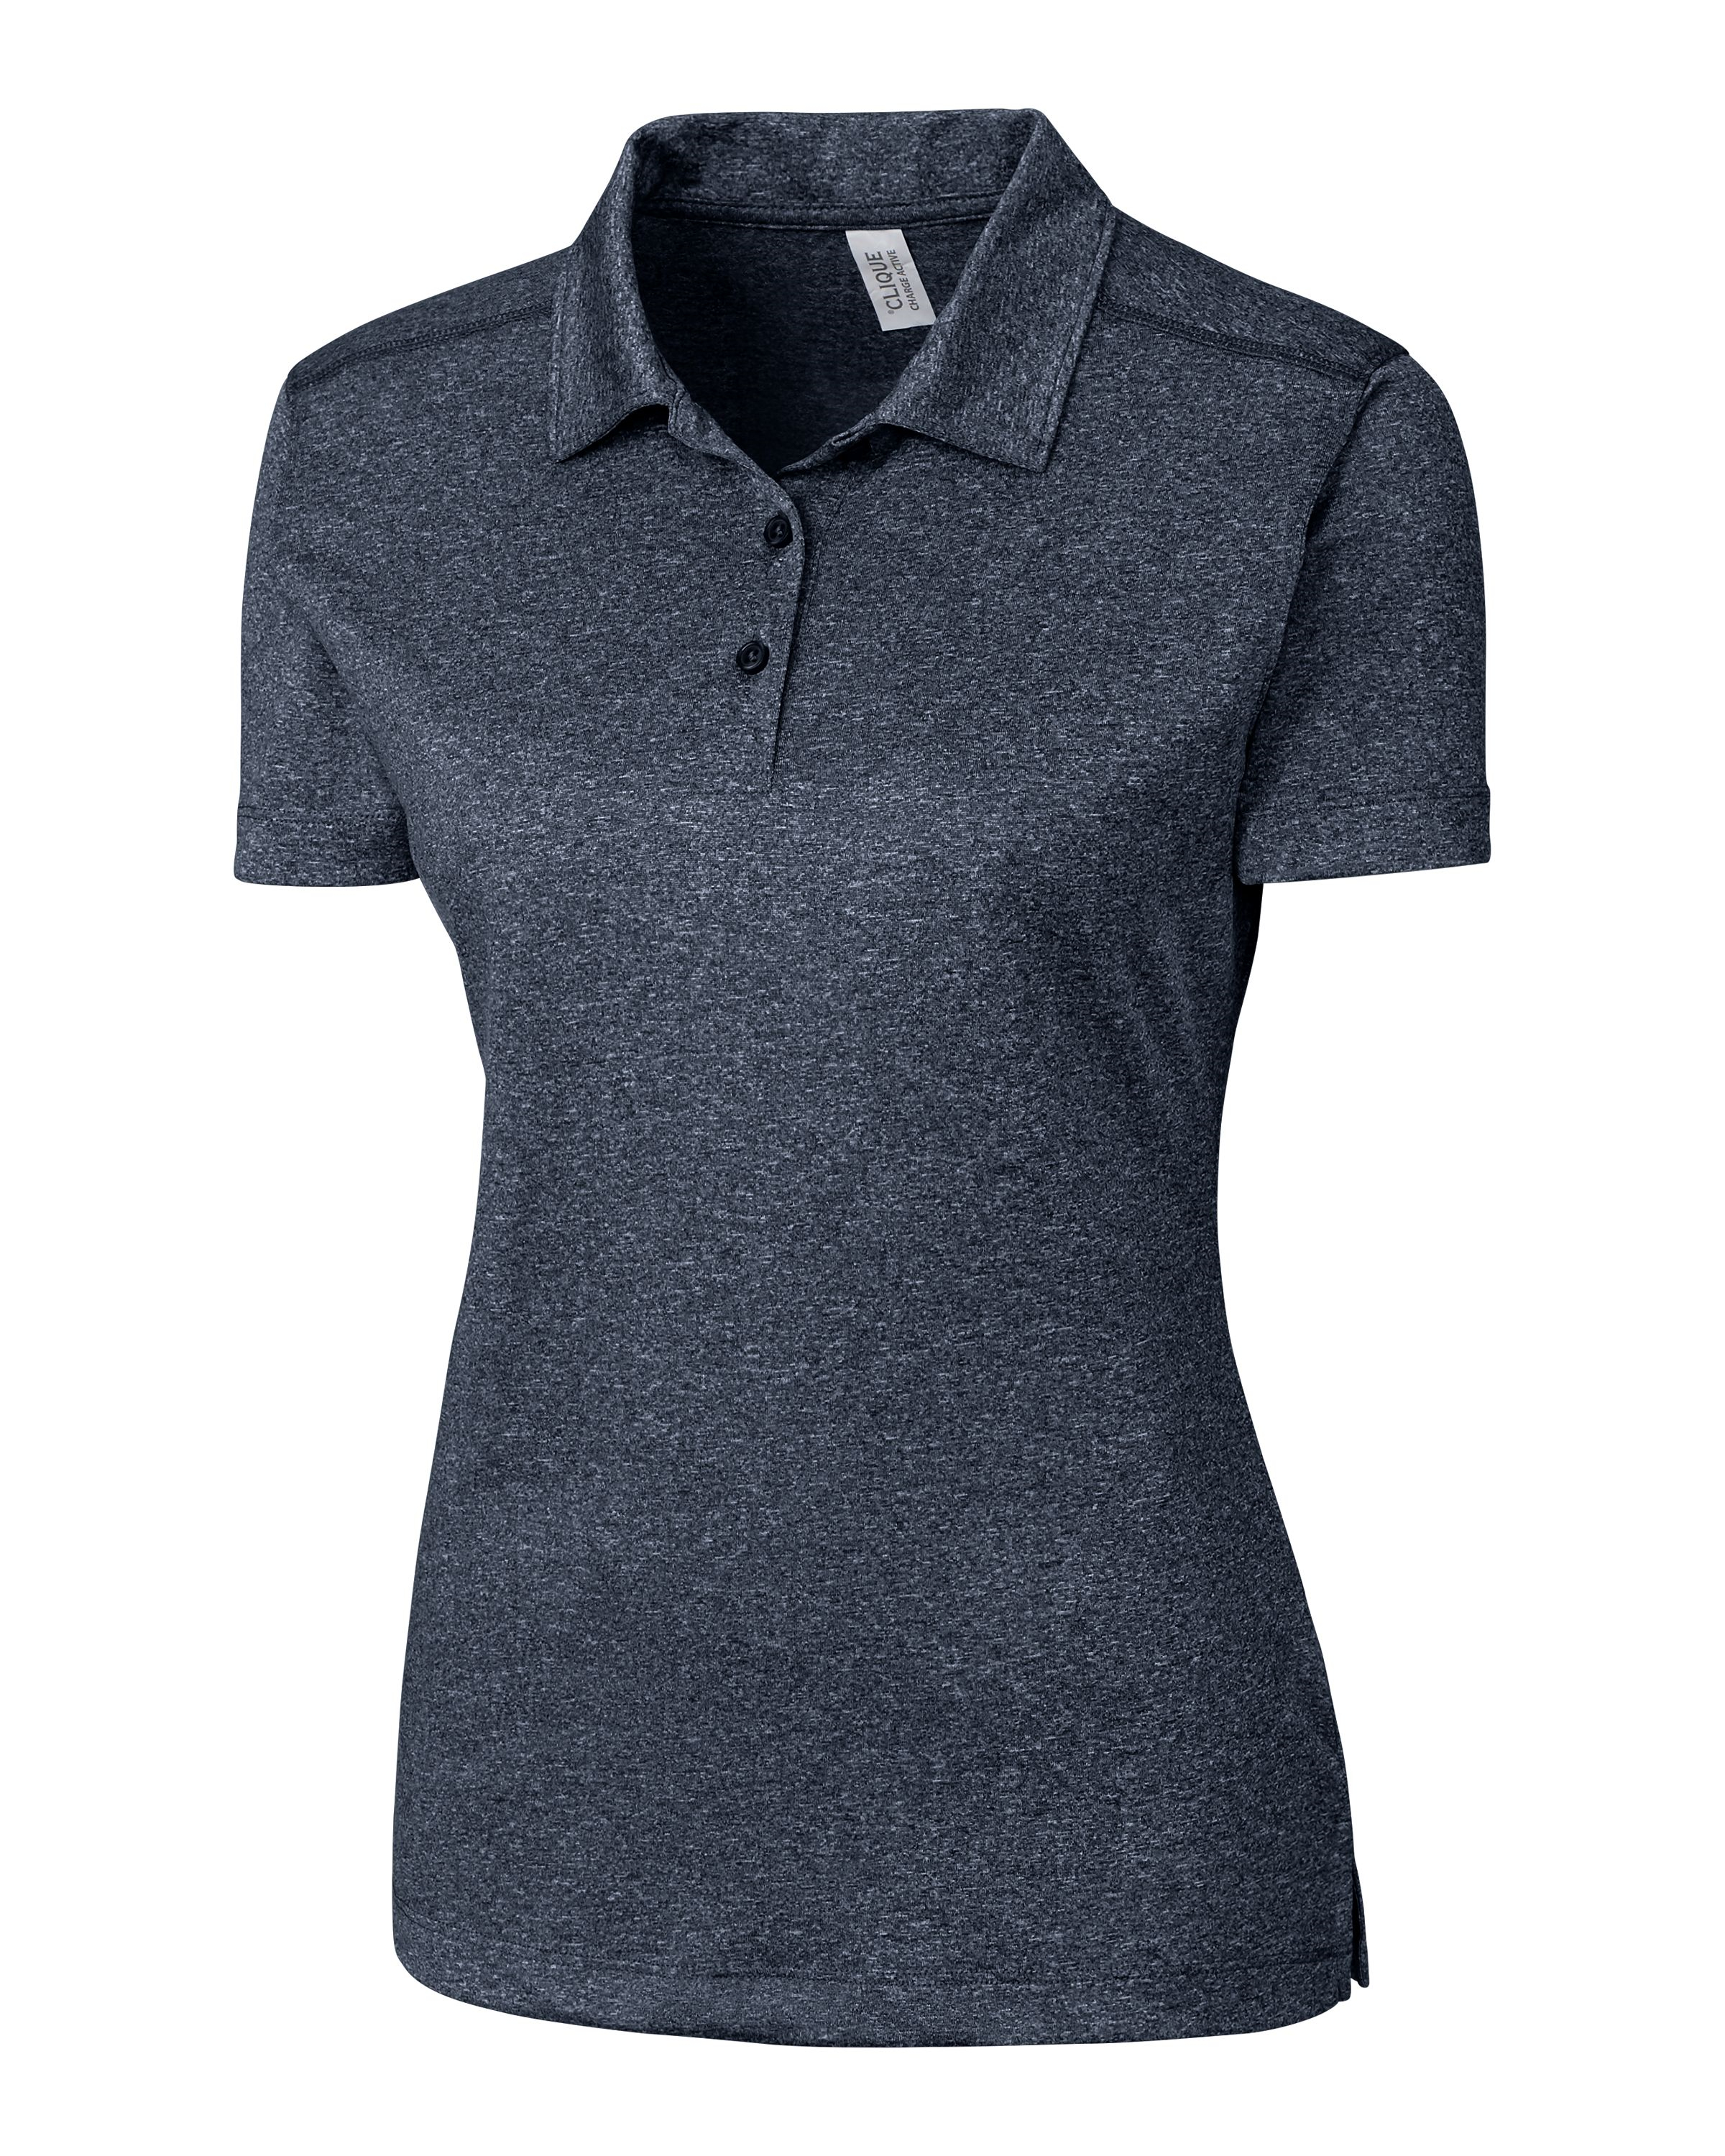 click to view Navy Heather(NH)